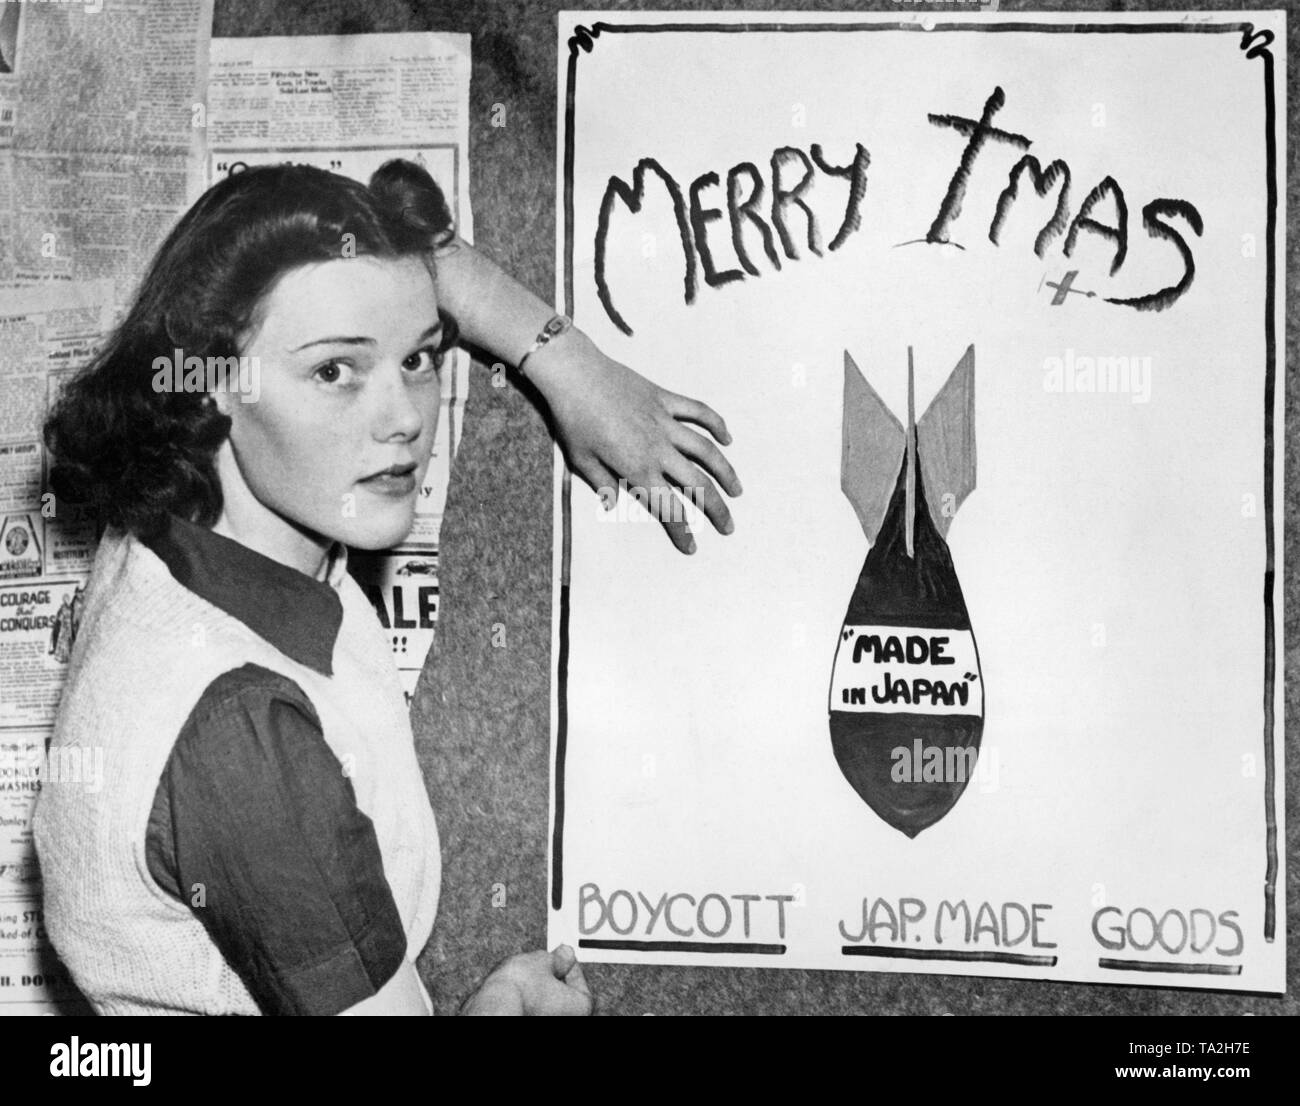 An American student hangs a poster at the Youngstown University in Ohio, which calls for a boycott of Japanese goods after the outbreak of the Second Japanese-Chinese War. On the poster: 'Merry Xmas, Boycott Jap. Made Goods '. In the middle is a bomb with the text 'Made in Japan'. Stock Photo